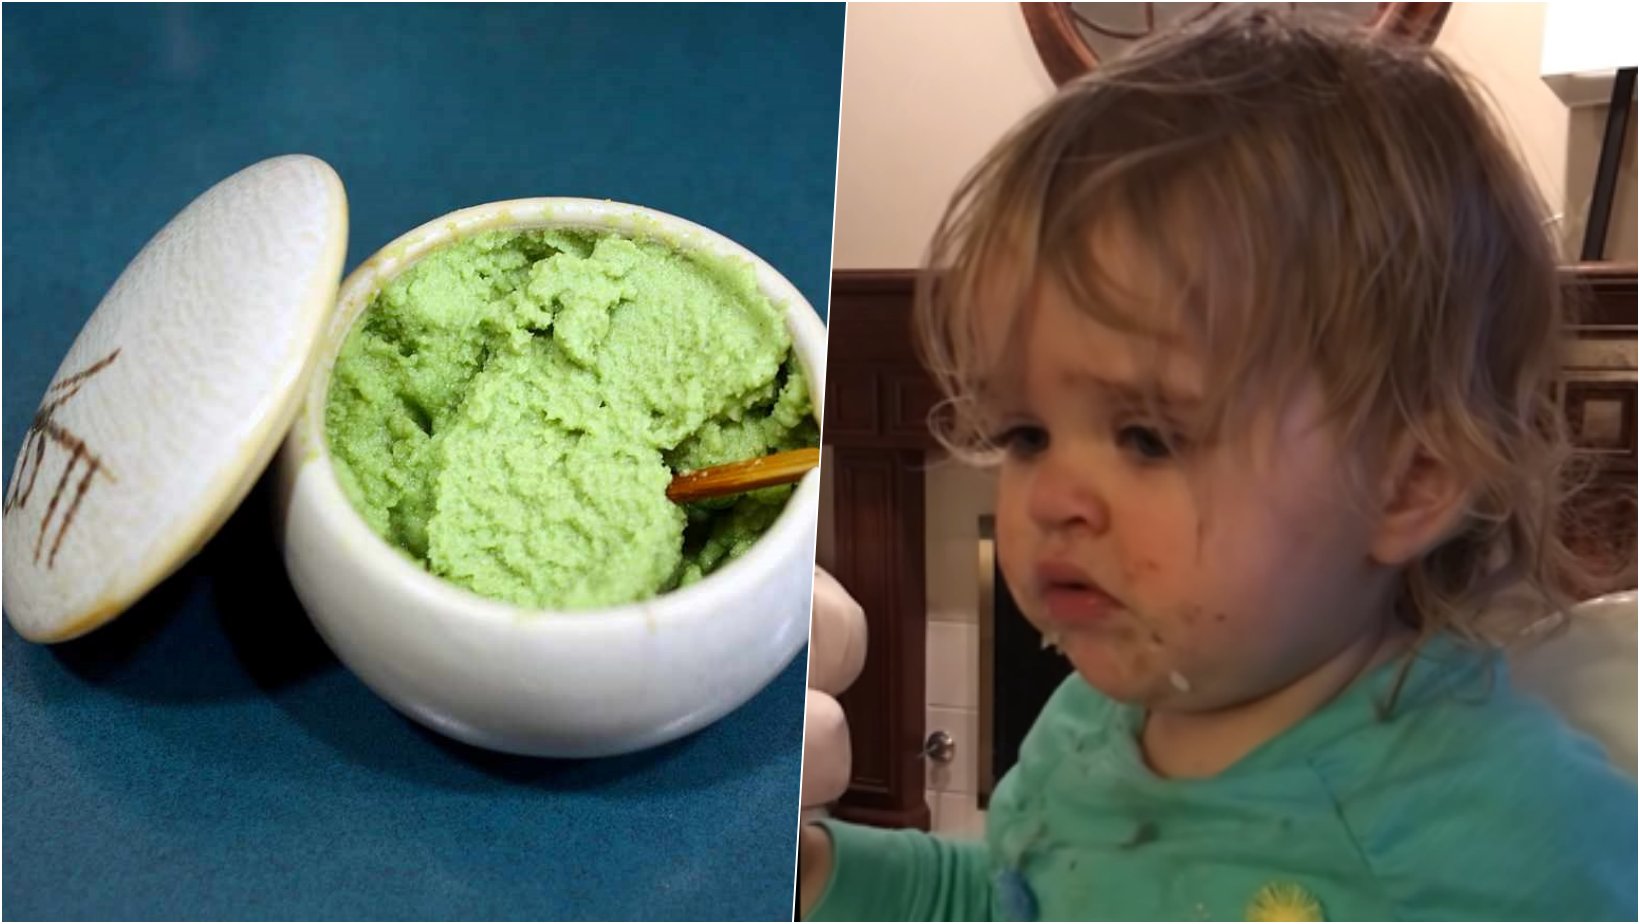 6 facebook cover 2.png?resize=412,232 - A Mother Is Being Accused Of Child Abuse After Feeding Her Kid With Wasabi